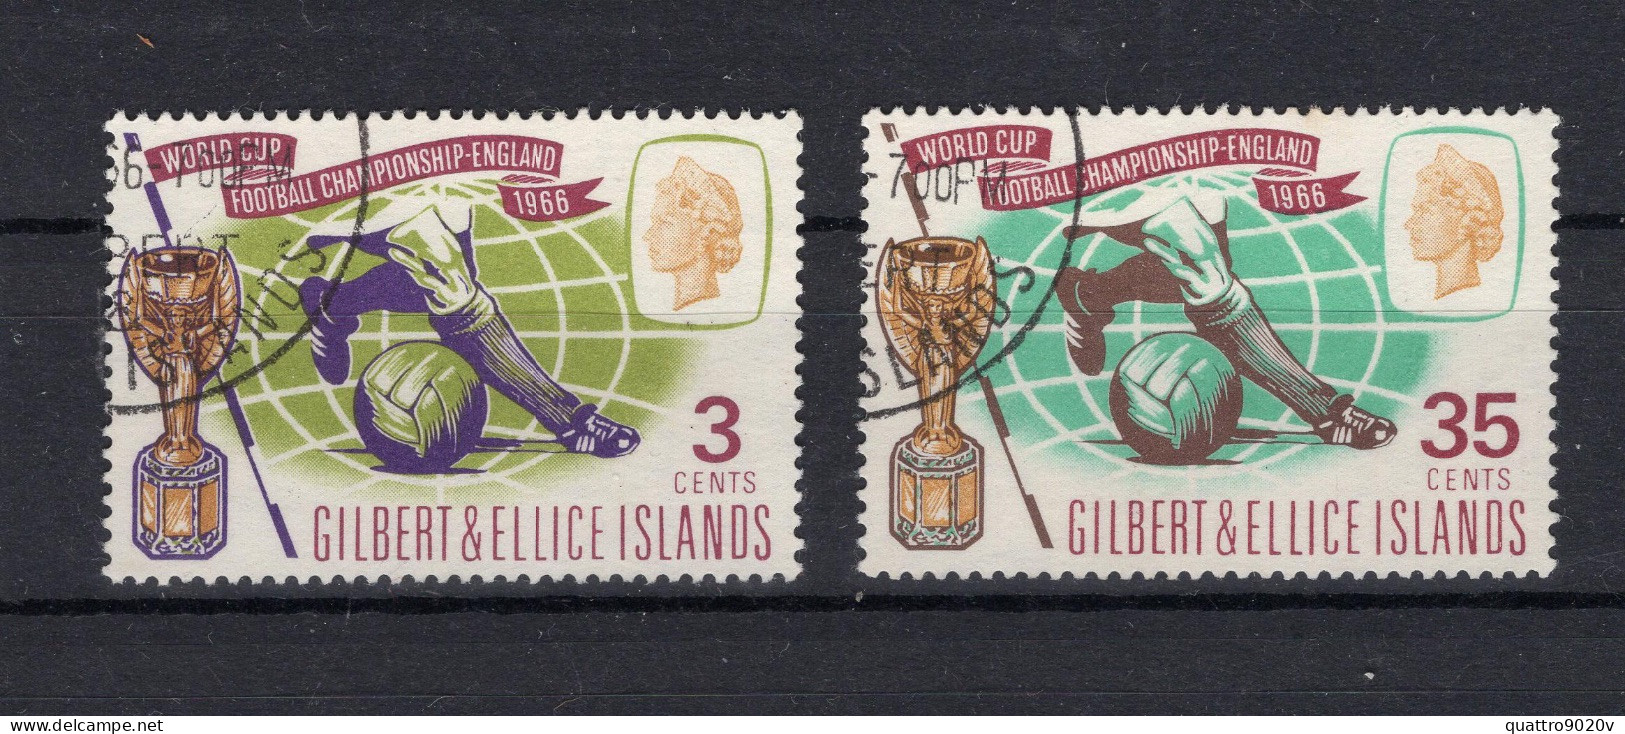 1966. World Cup Football Championship. Used (o) - Isole Gilbert Ed Ellice (...-1979)